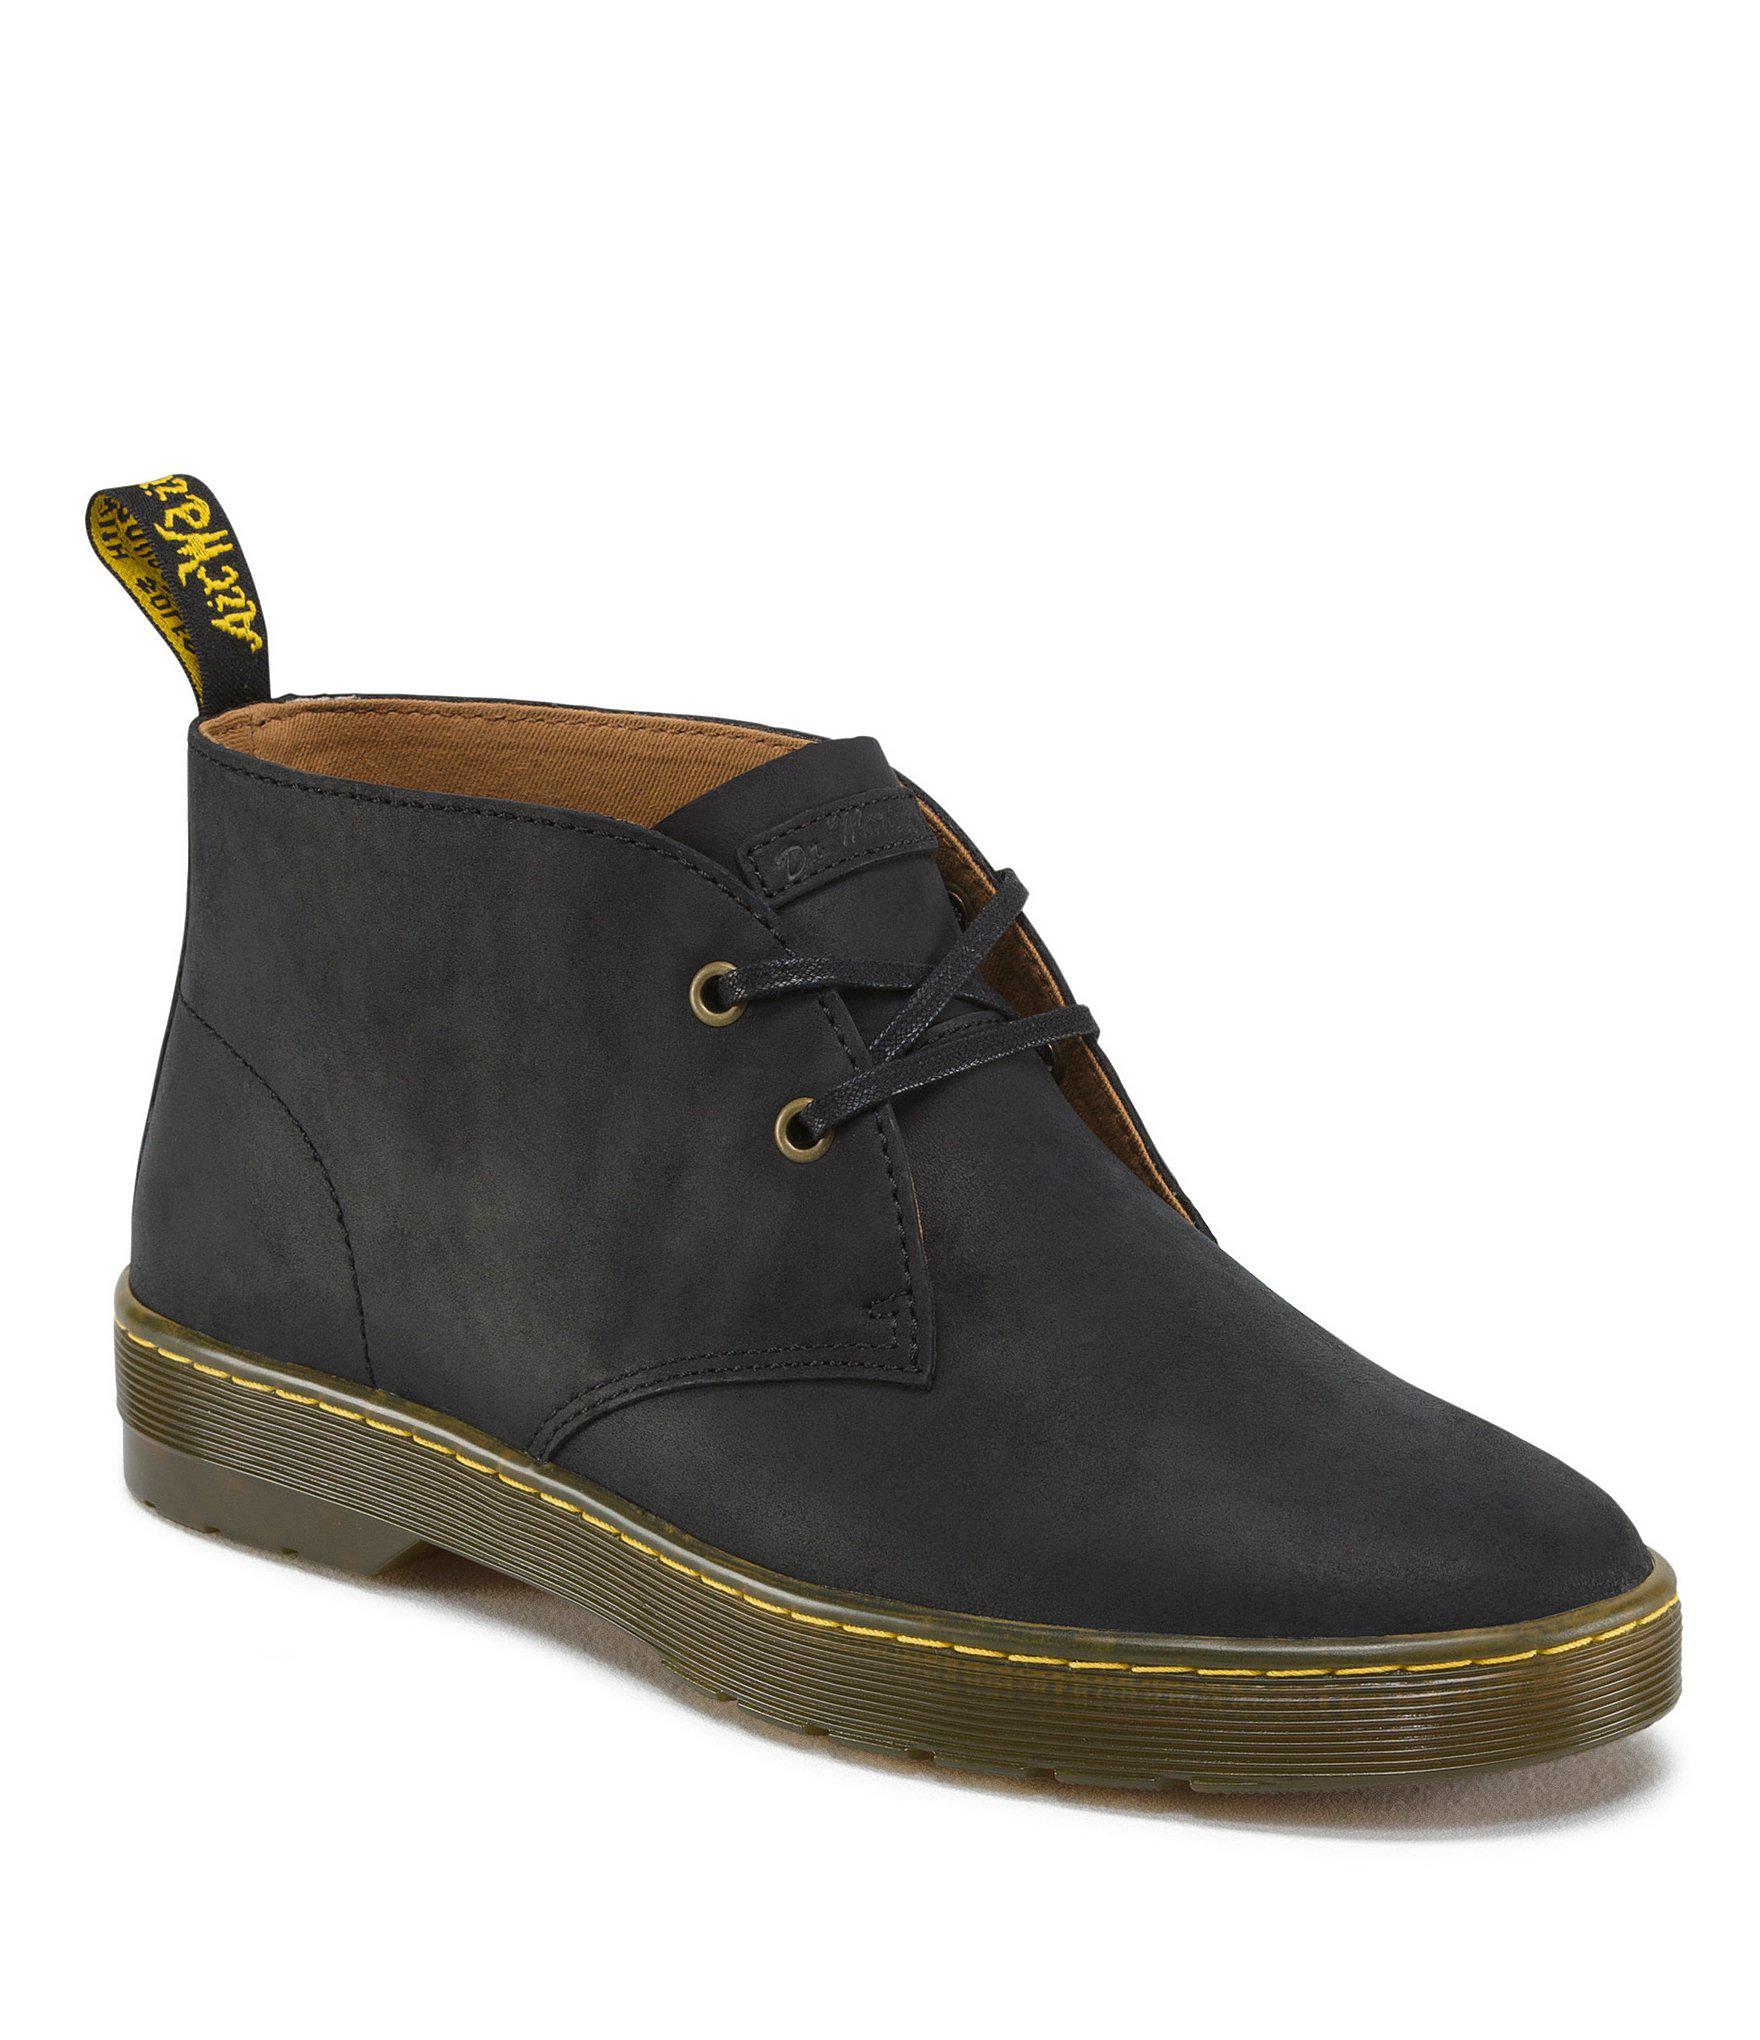 Dr. Martens Leather Cabrillo Chukka Boots in Black for Men - Lyst